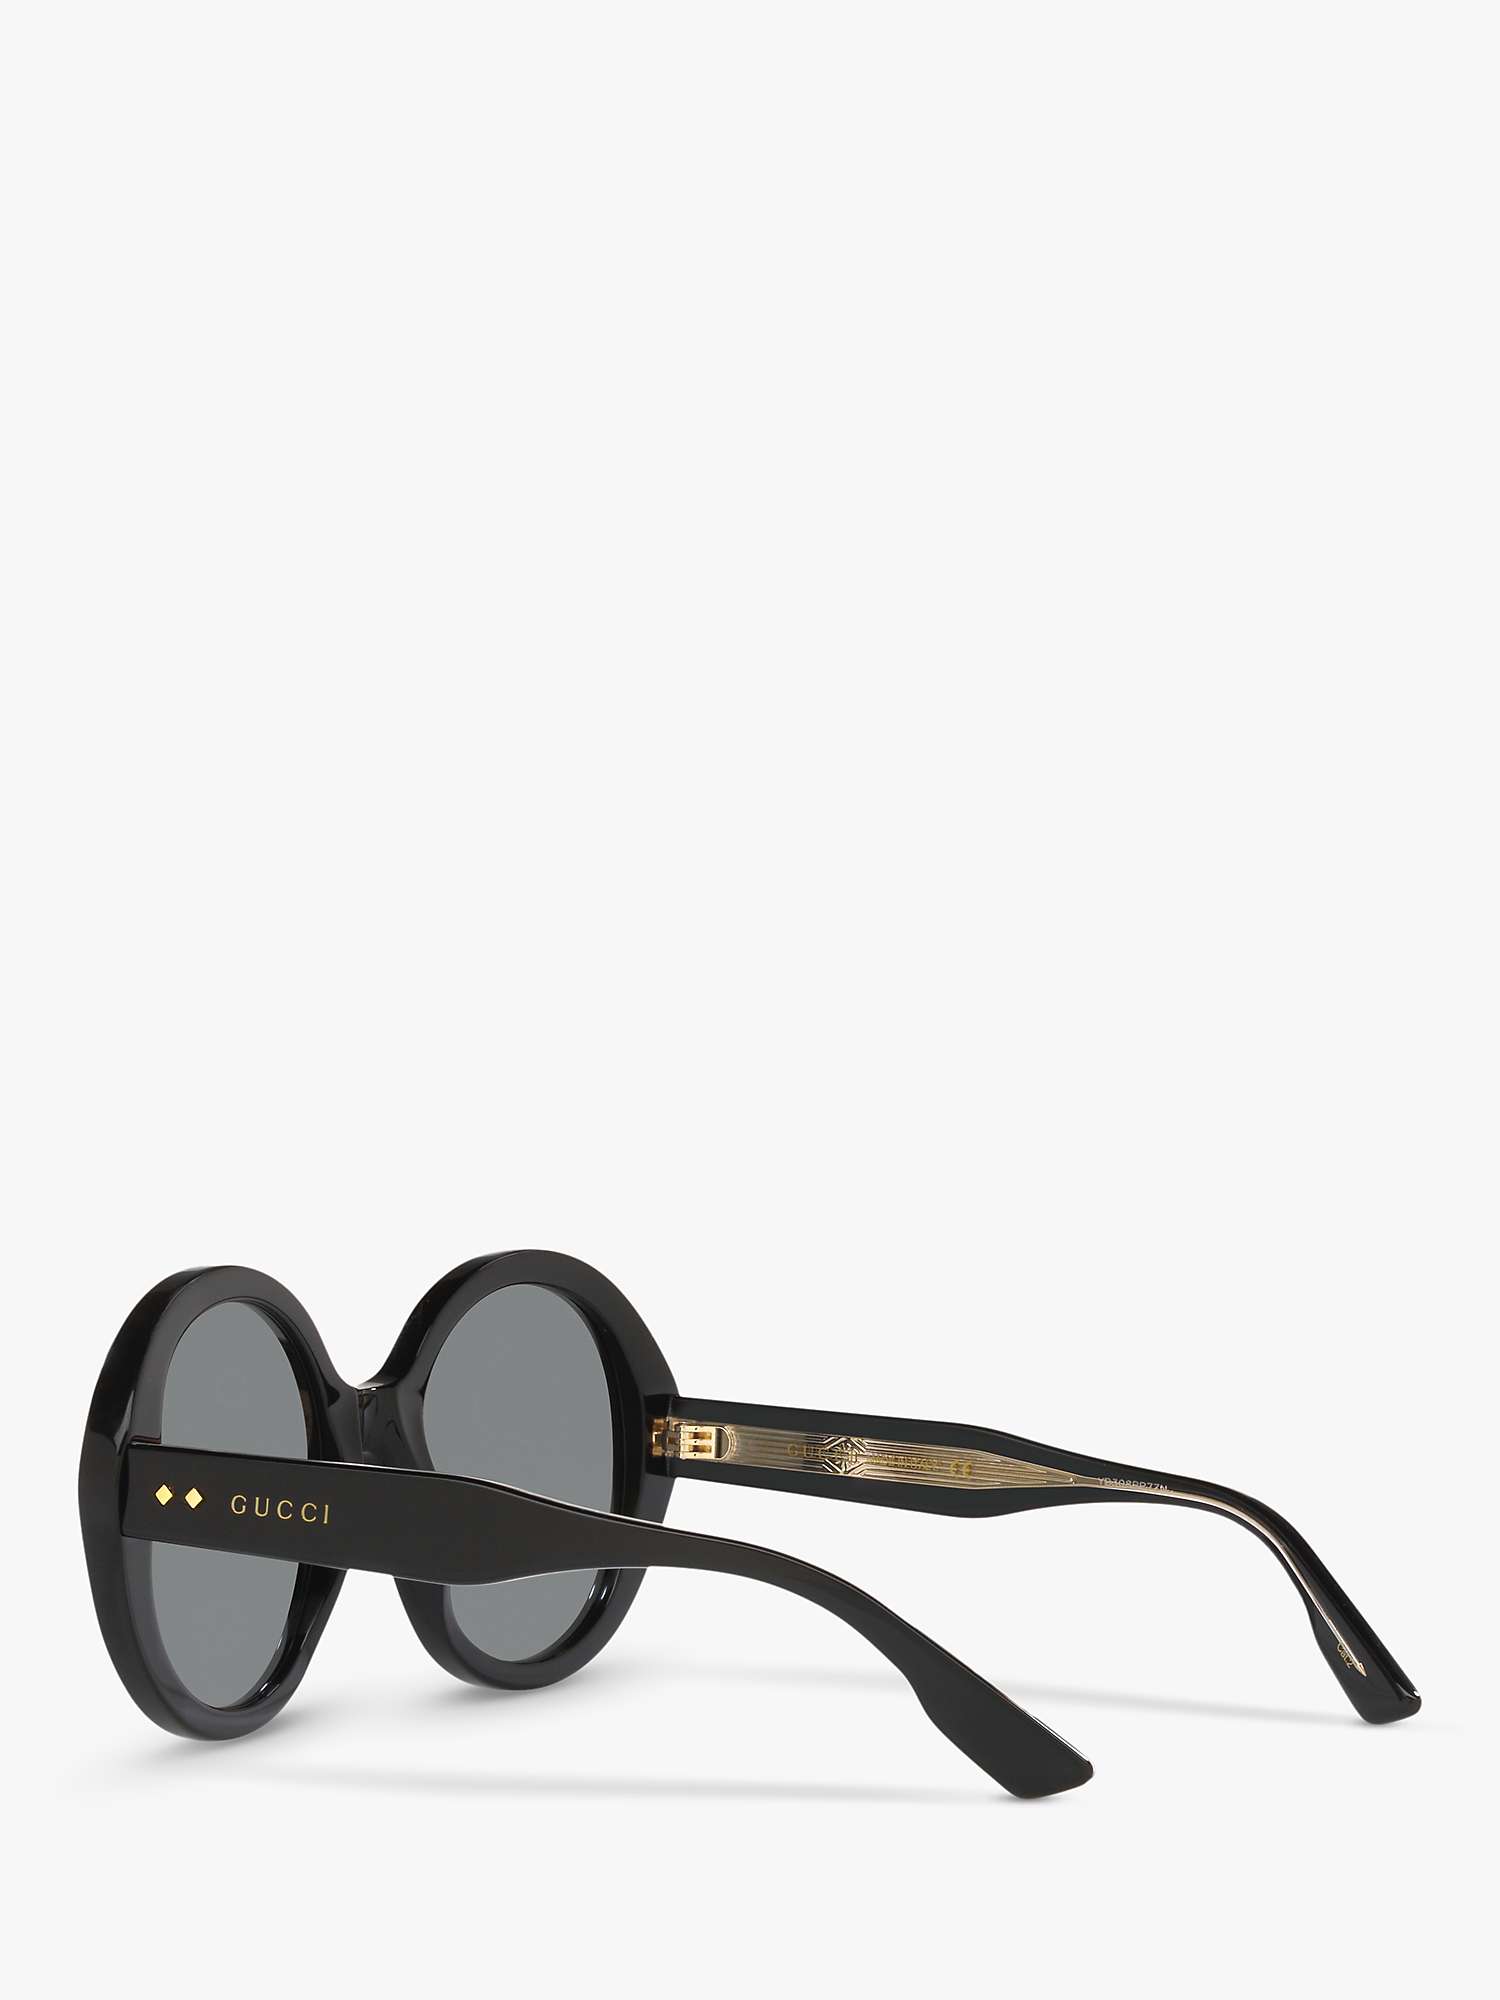 Buy Gucci GG1081S Unisex Round Sunglasses Online at johnlewis.com